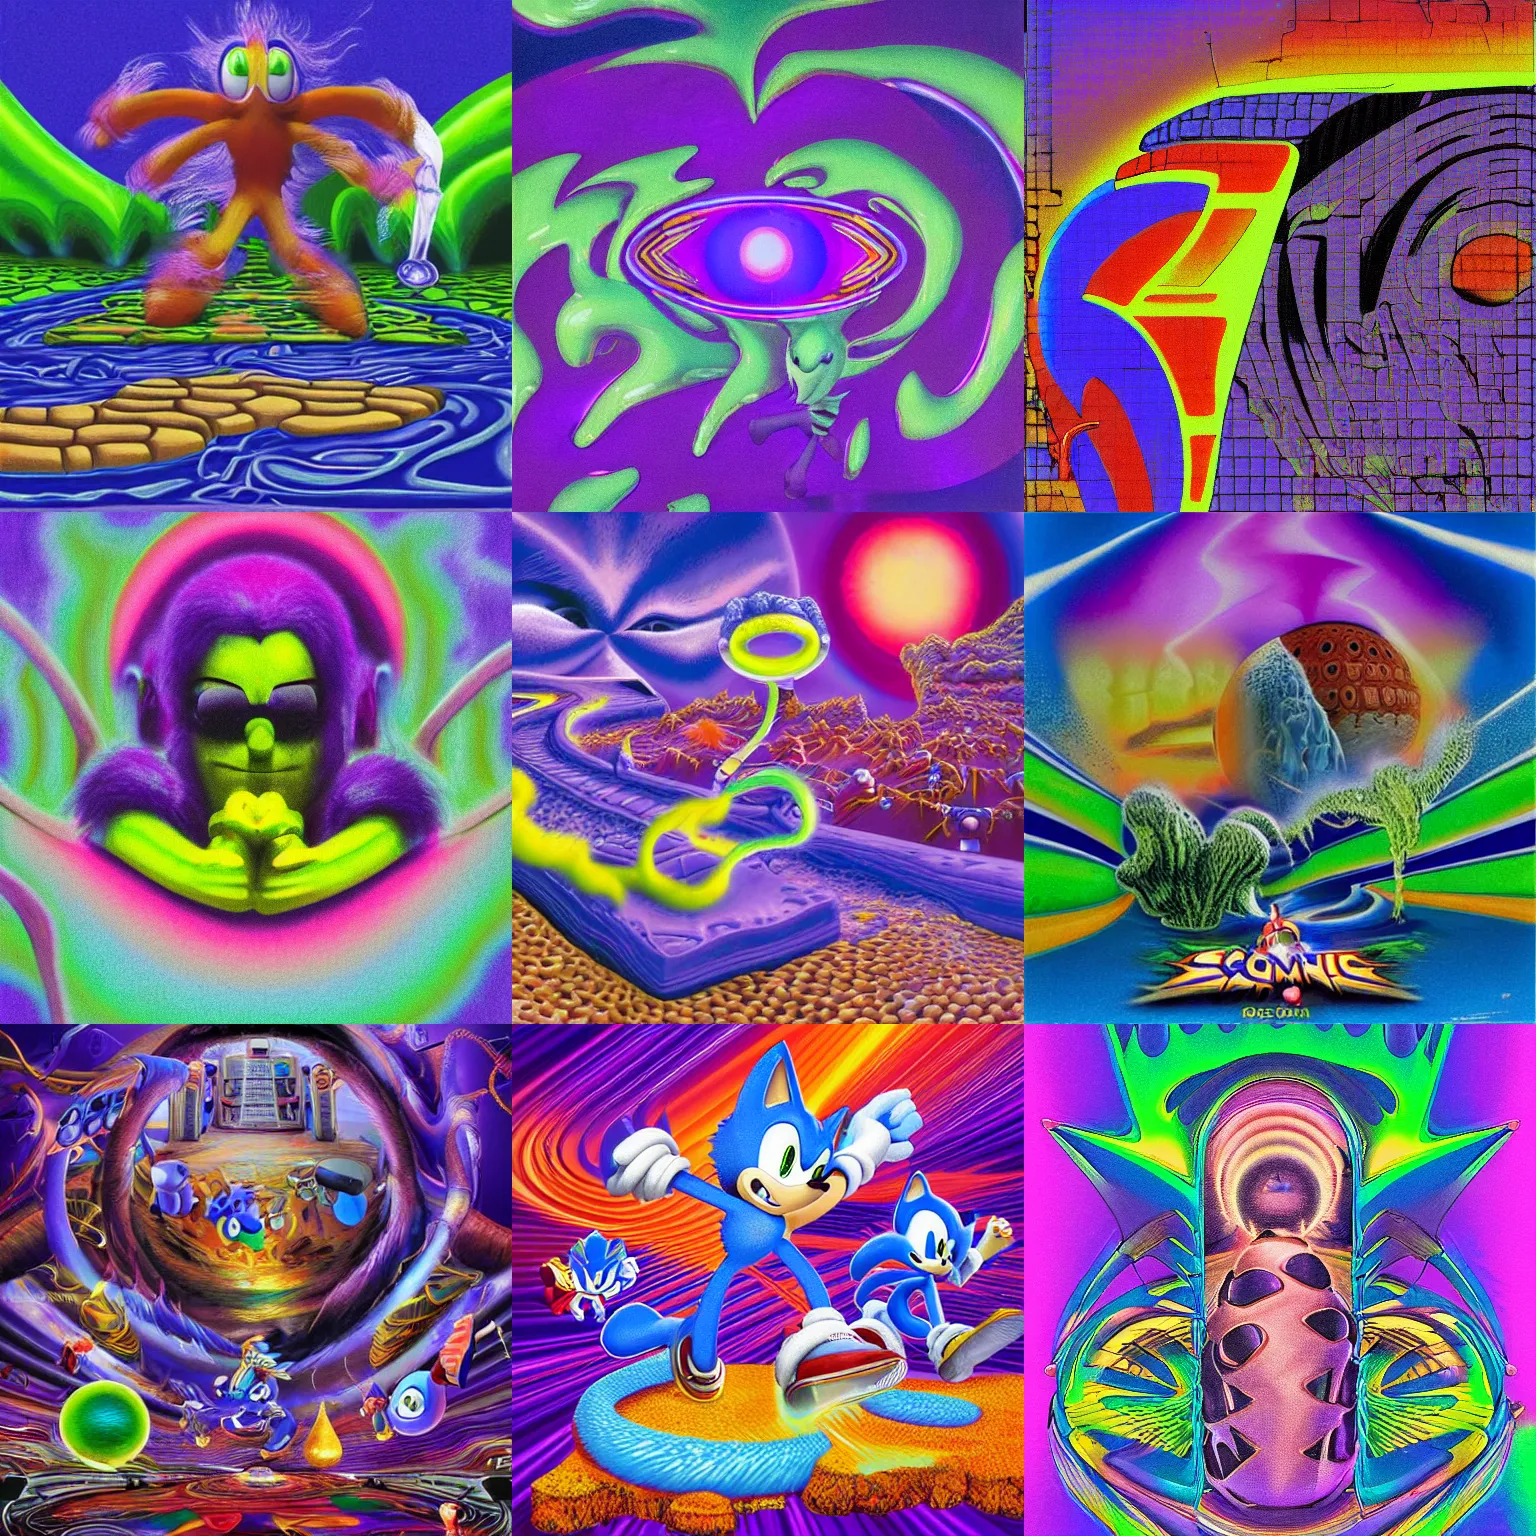 Prompt: dreaming of closeup sonic the hedgehog portrait lava lamp claymation scifi matte painting landscape of a surreal alex grey, sonic retro moulded professional soft pastels high quality airbrush art album cover of a liquid dissolving airbrush art lsd sonic the hedgehog swimming through cyberspace purple checkerboard sonic background 1 9 8 0 s 1 9 8 2 sega genesis video game album cover